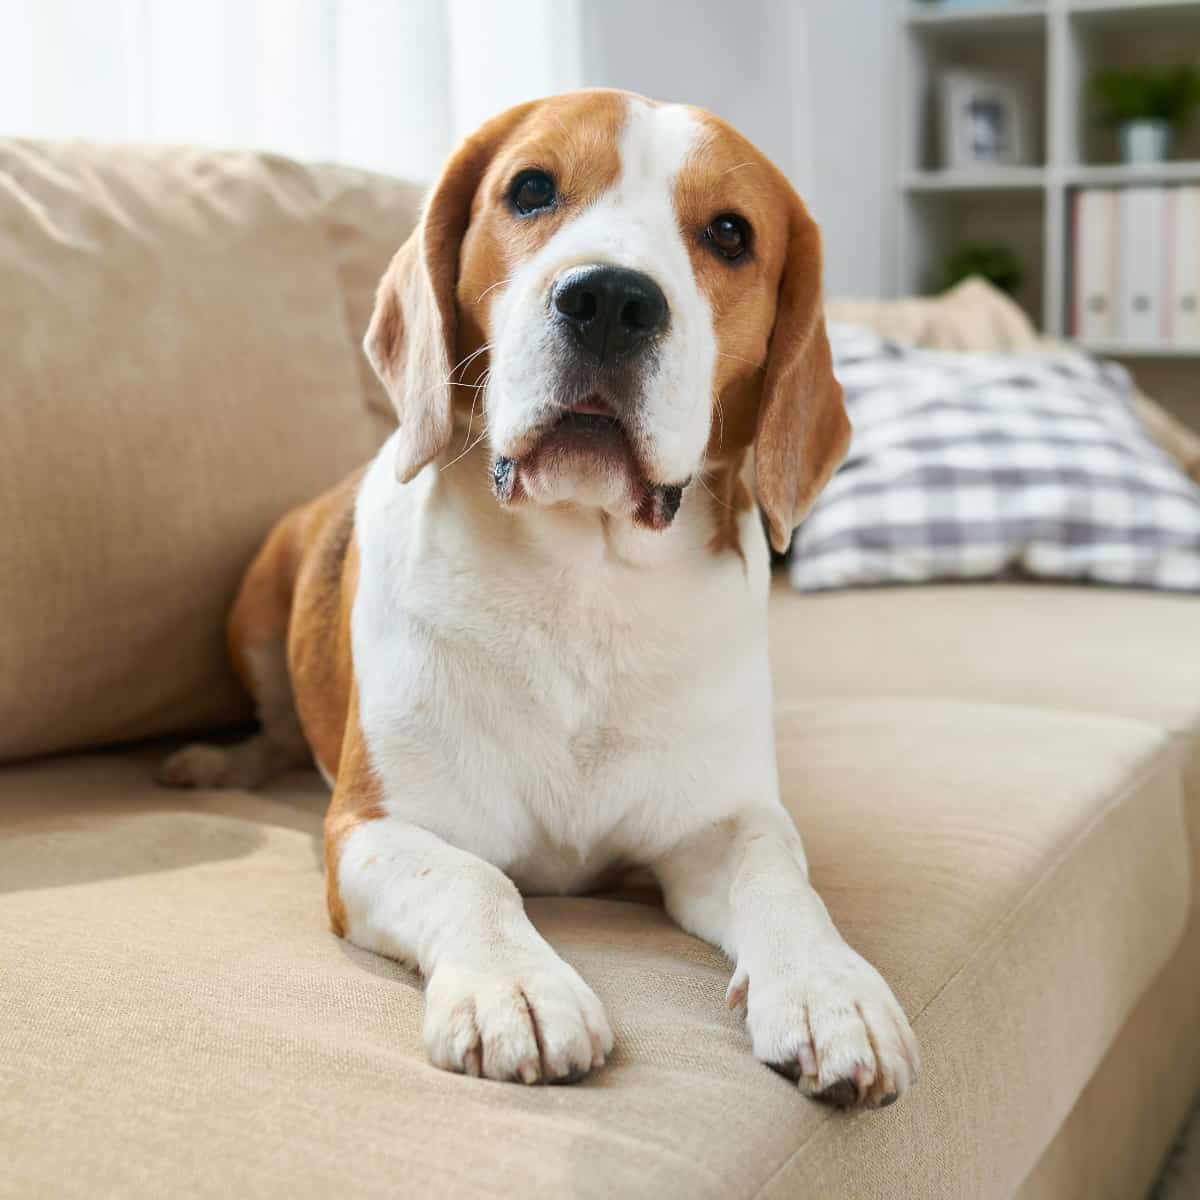 Beagle sitting on the couch.